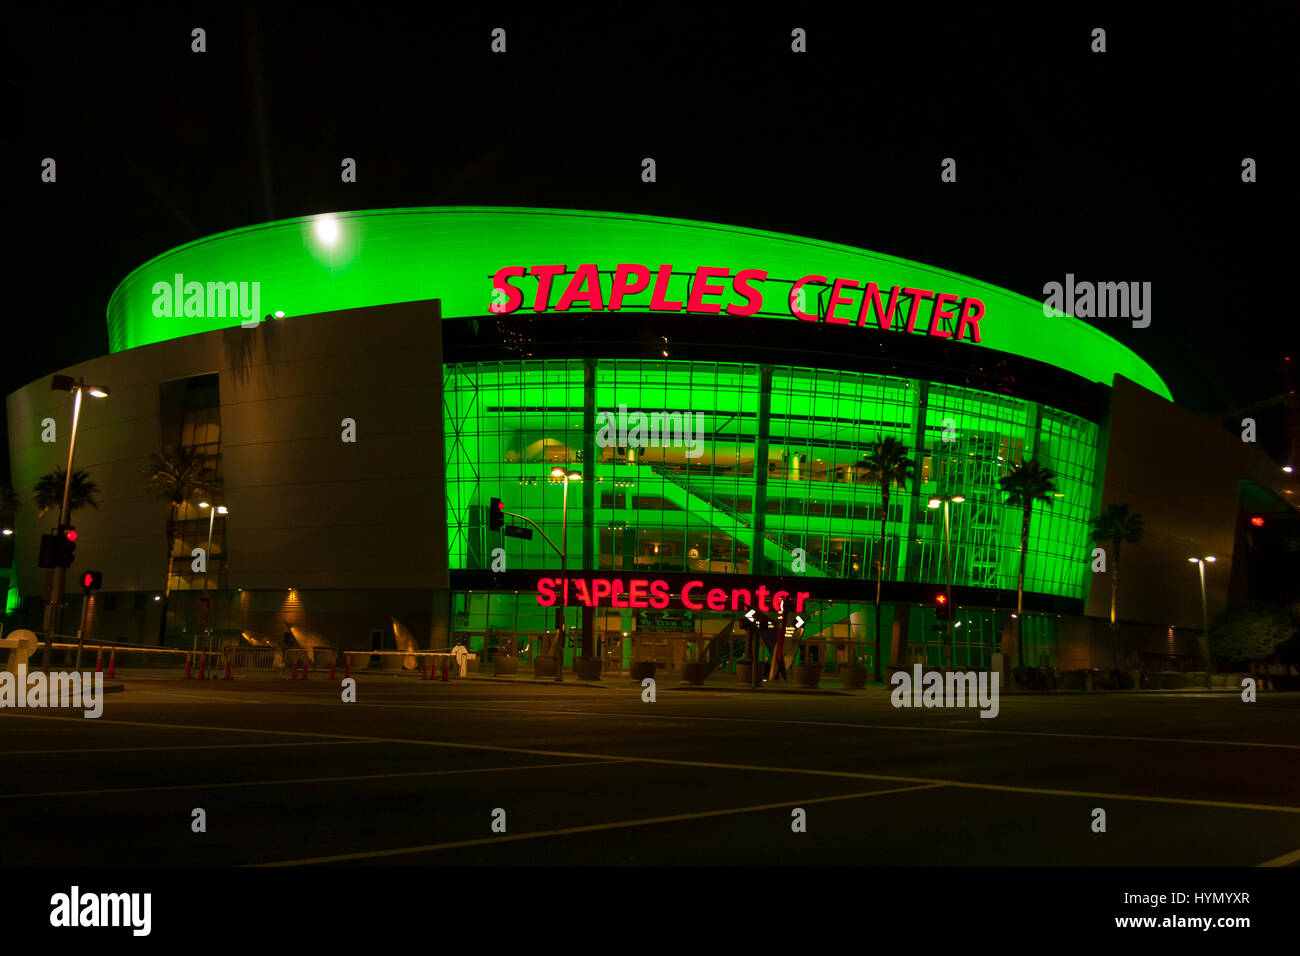 Staples Center at night in glowing green lighting Stock Photo